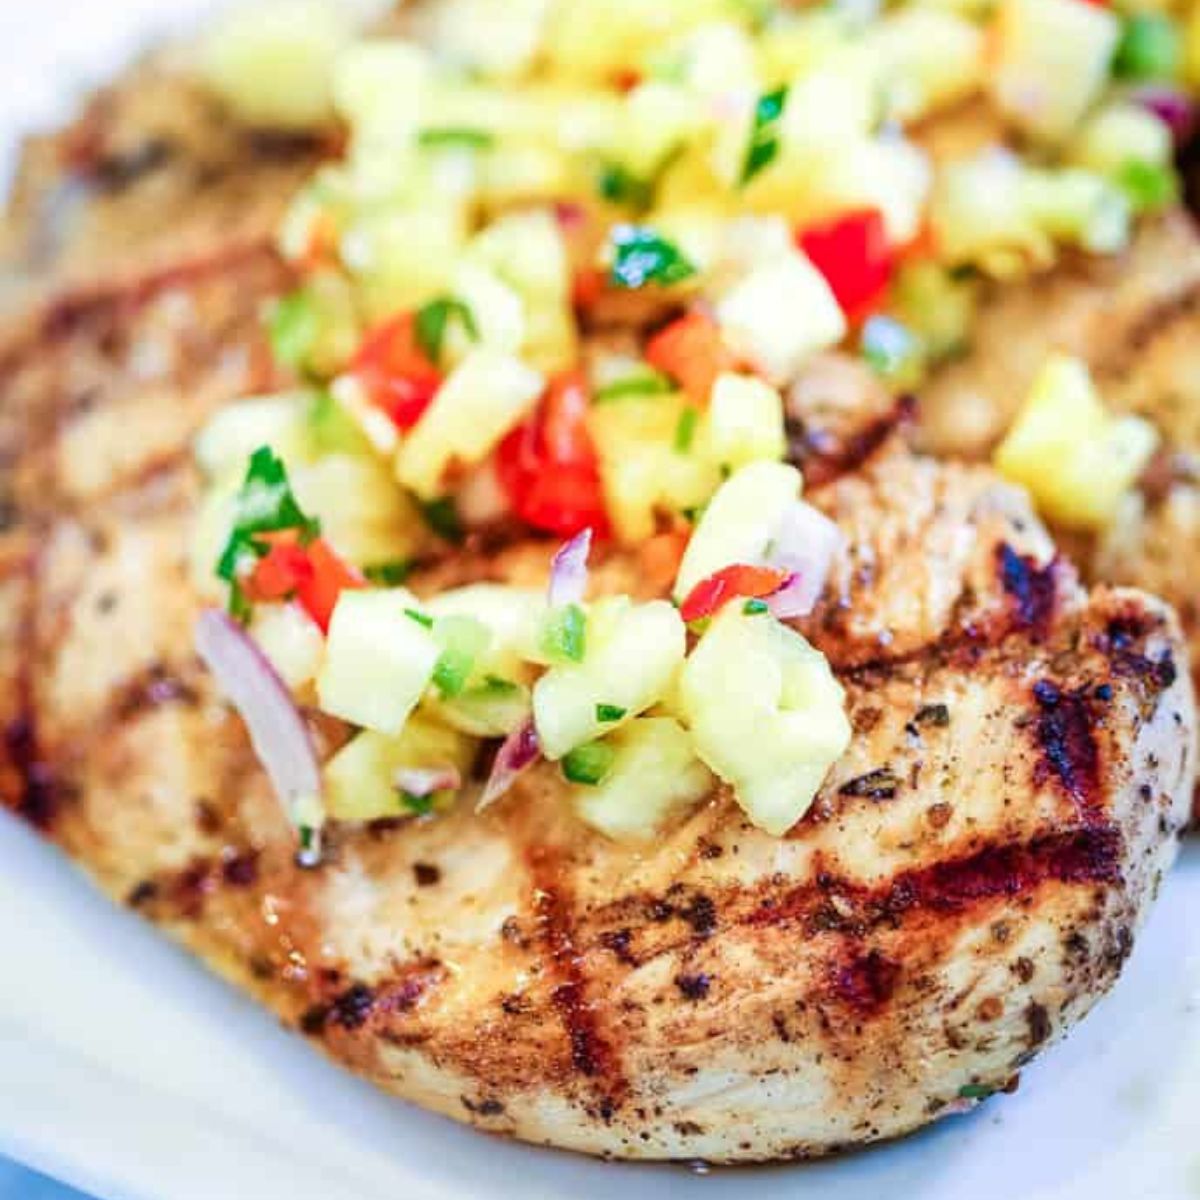 Grilled chicken breast topped with a colorful diced pineapple salsa, served on a white plate and featured in our recipe index.